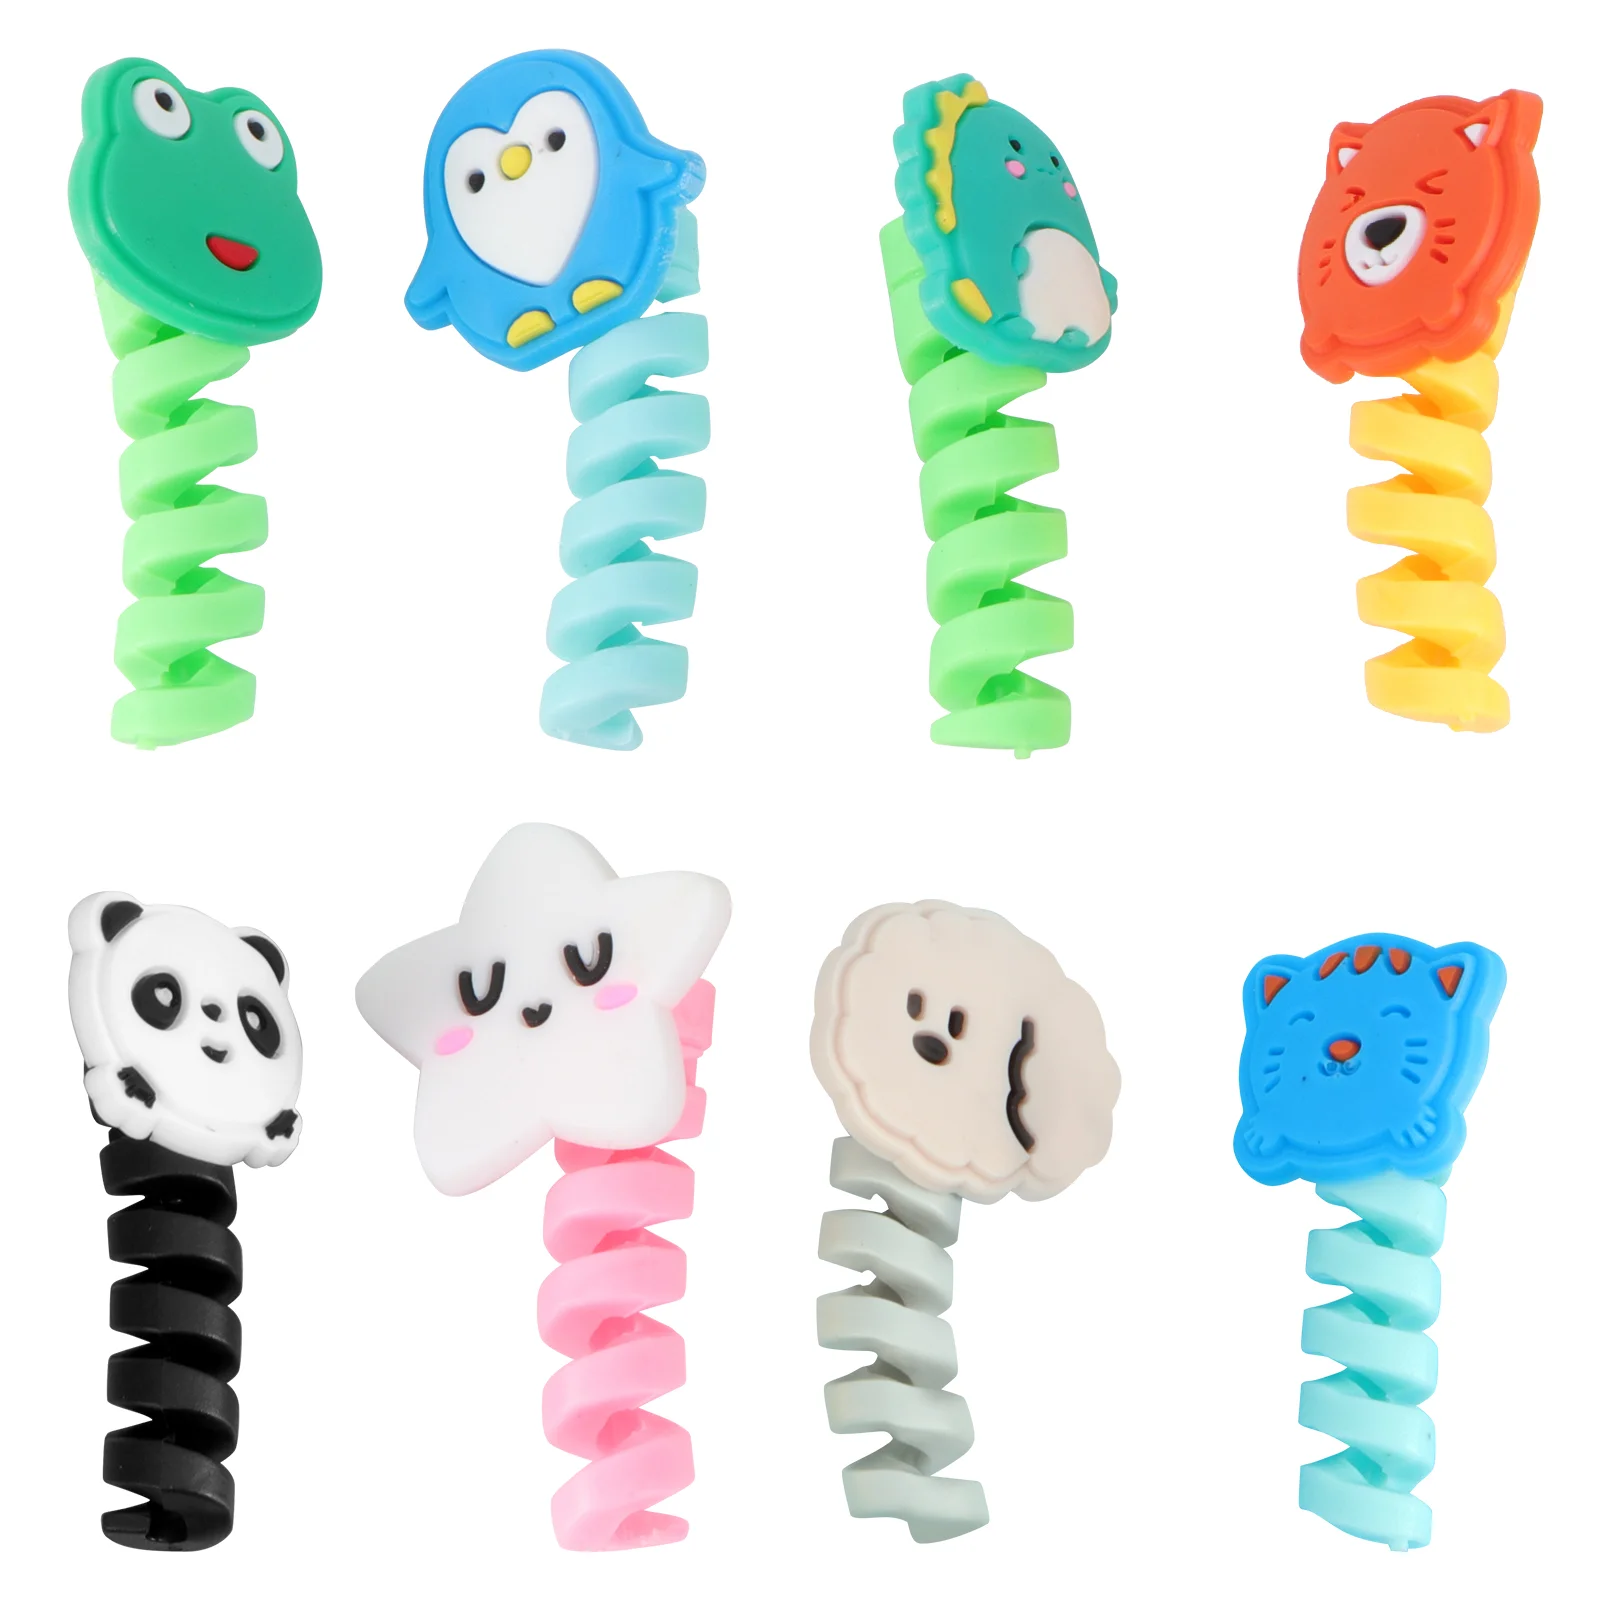 

Cable Protector Wire Animal Data Saver Winders Cartoon Protectors Organizers Earphone Silicone Cord Earbud Spiral Flexible